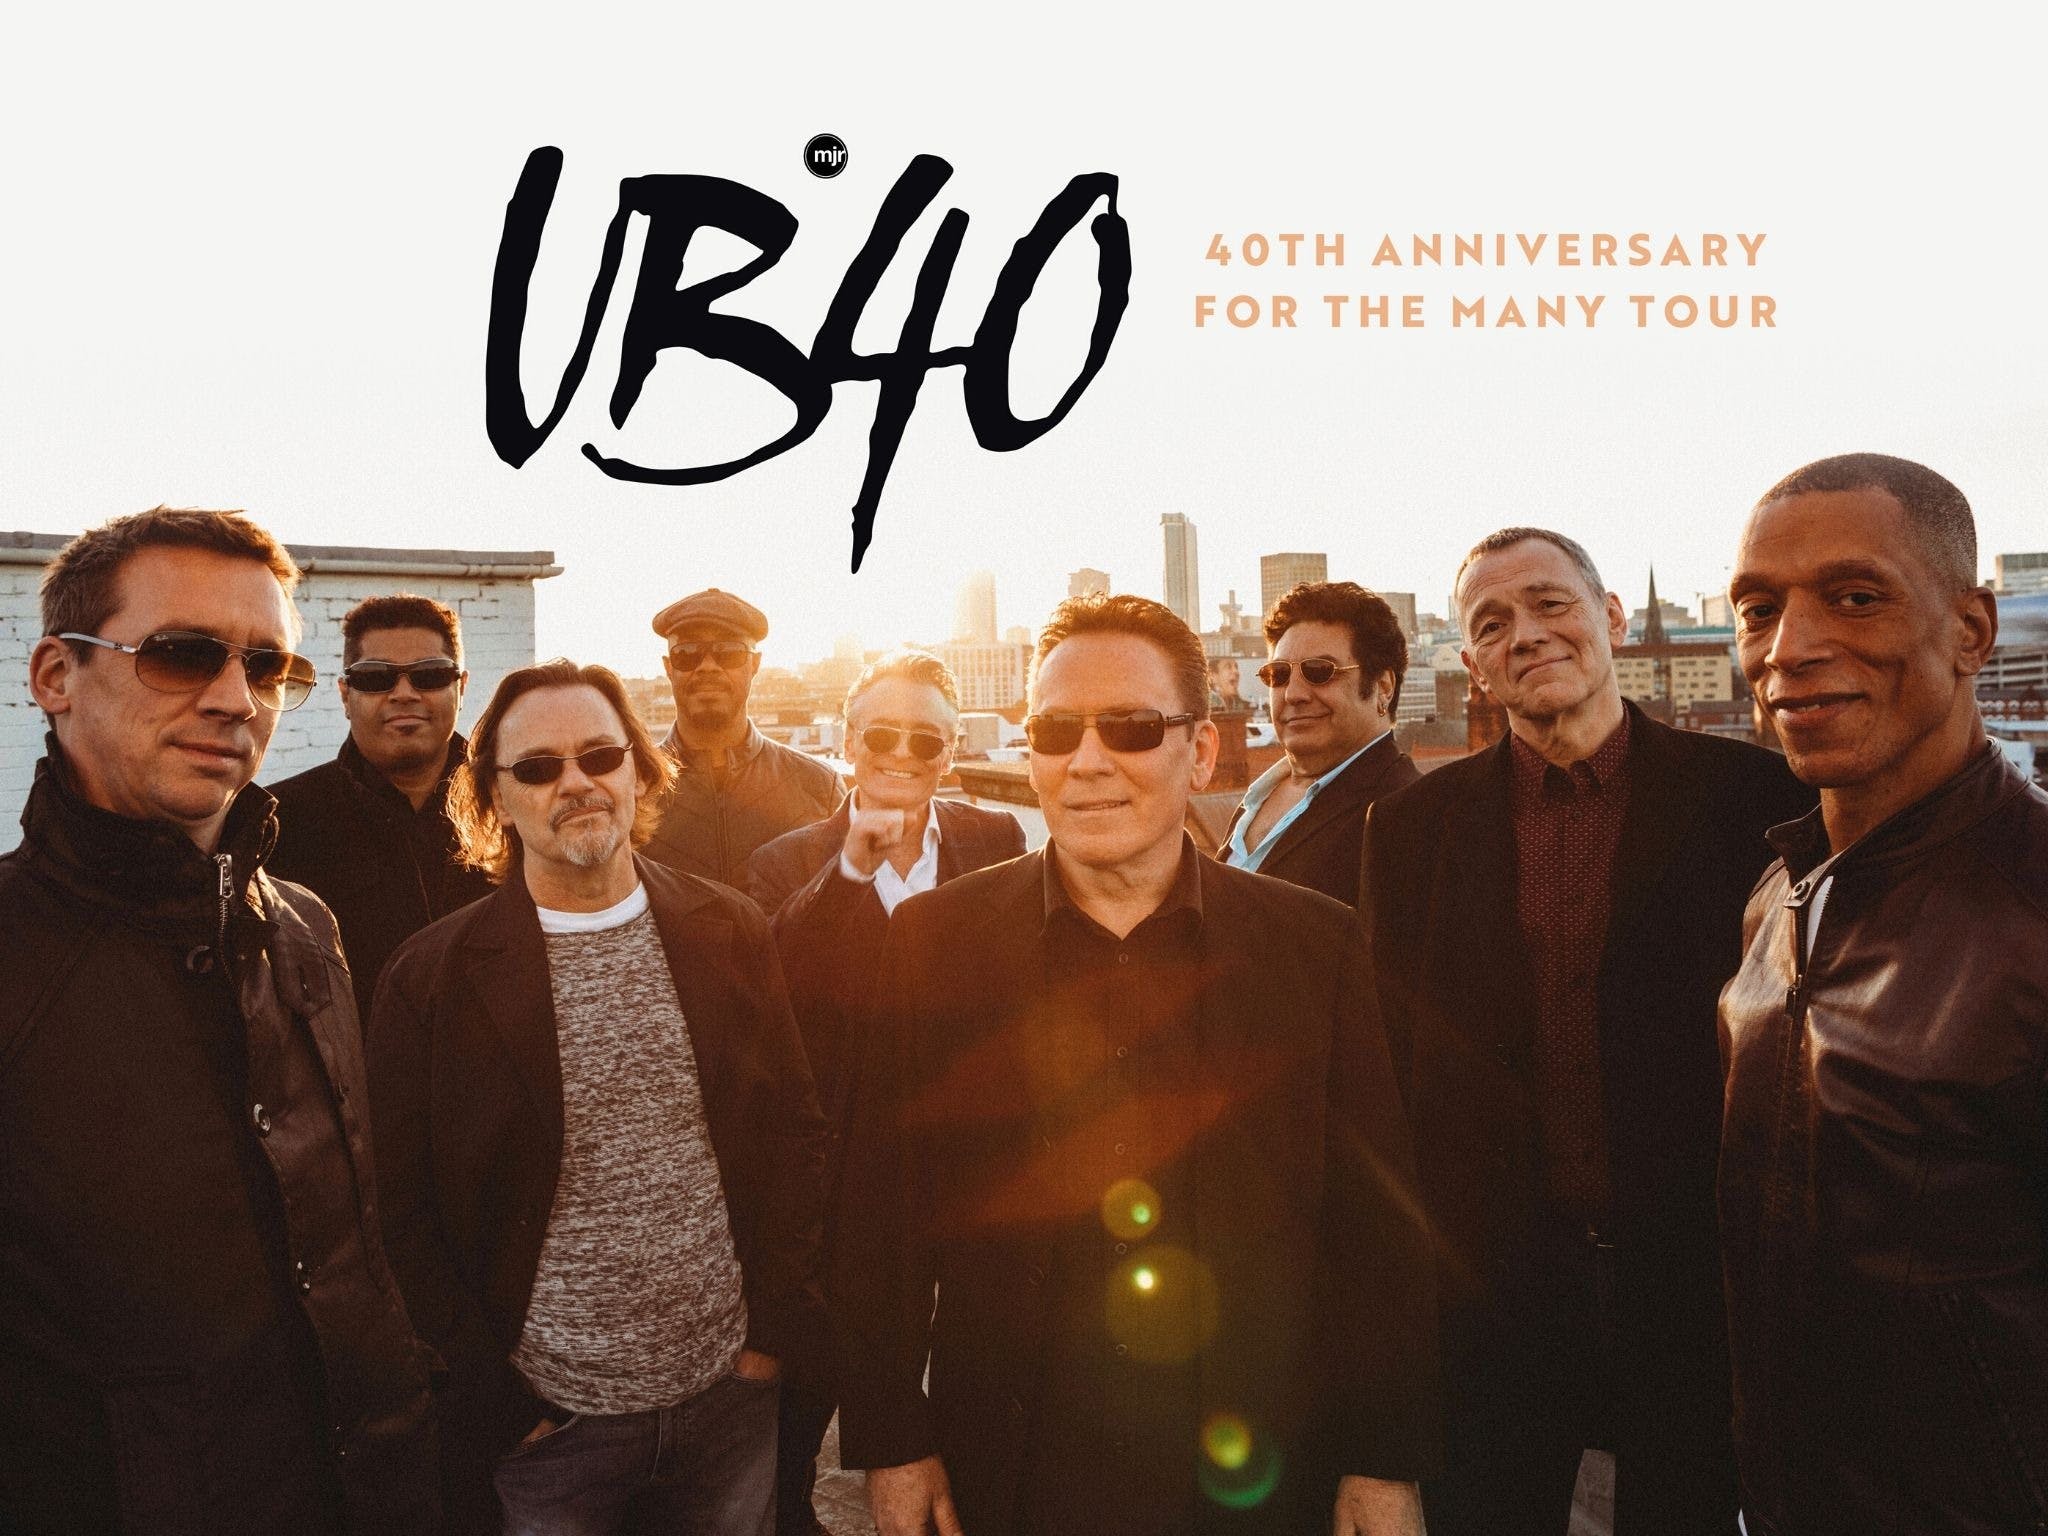 UB40 40th Anniversary Tour - Townsville Tourism